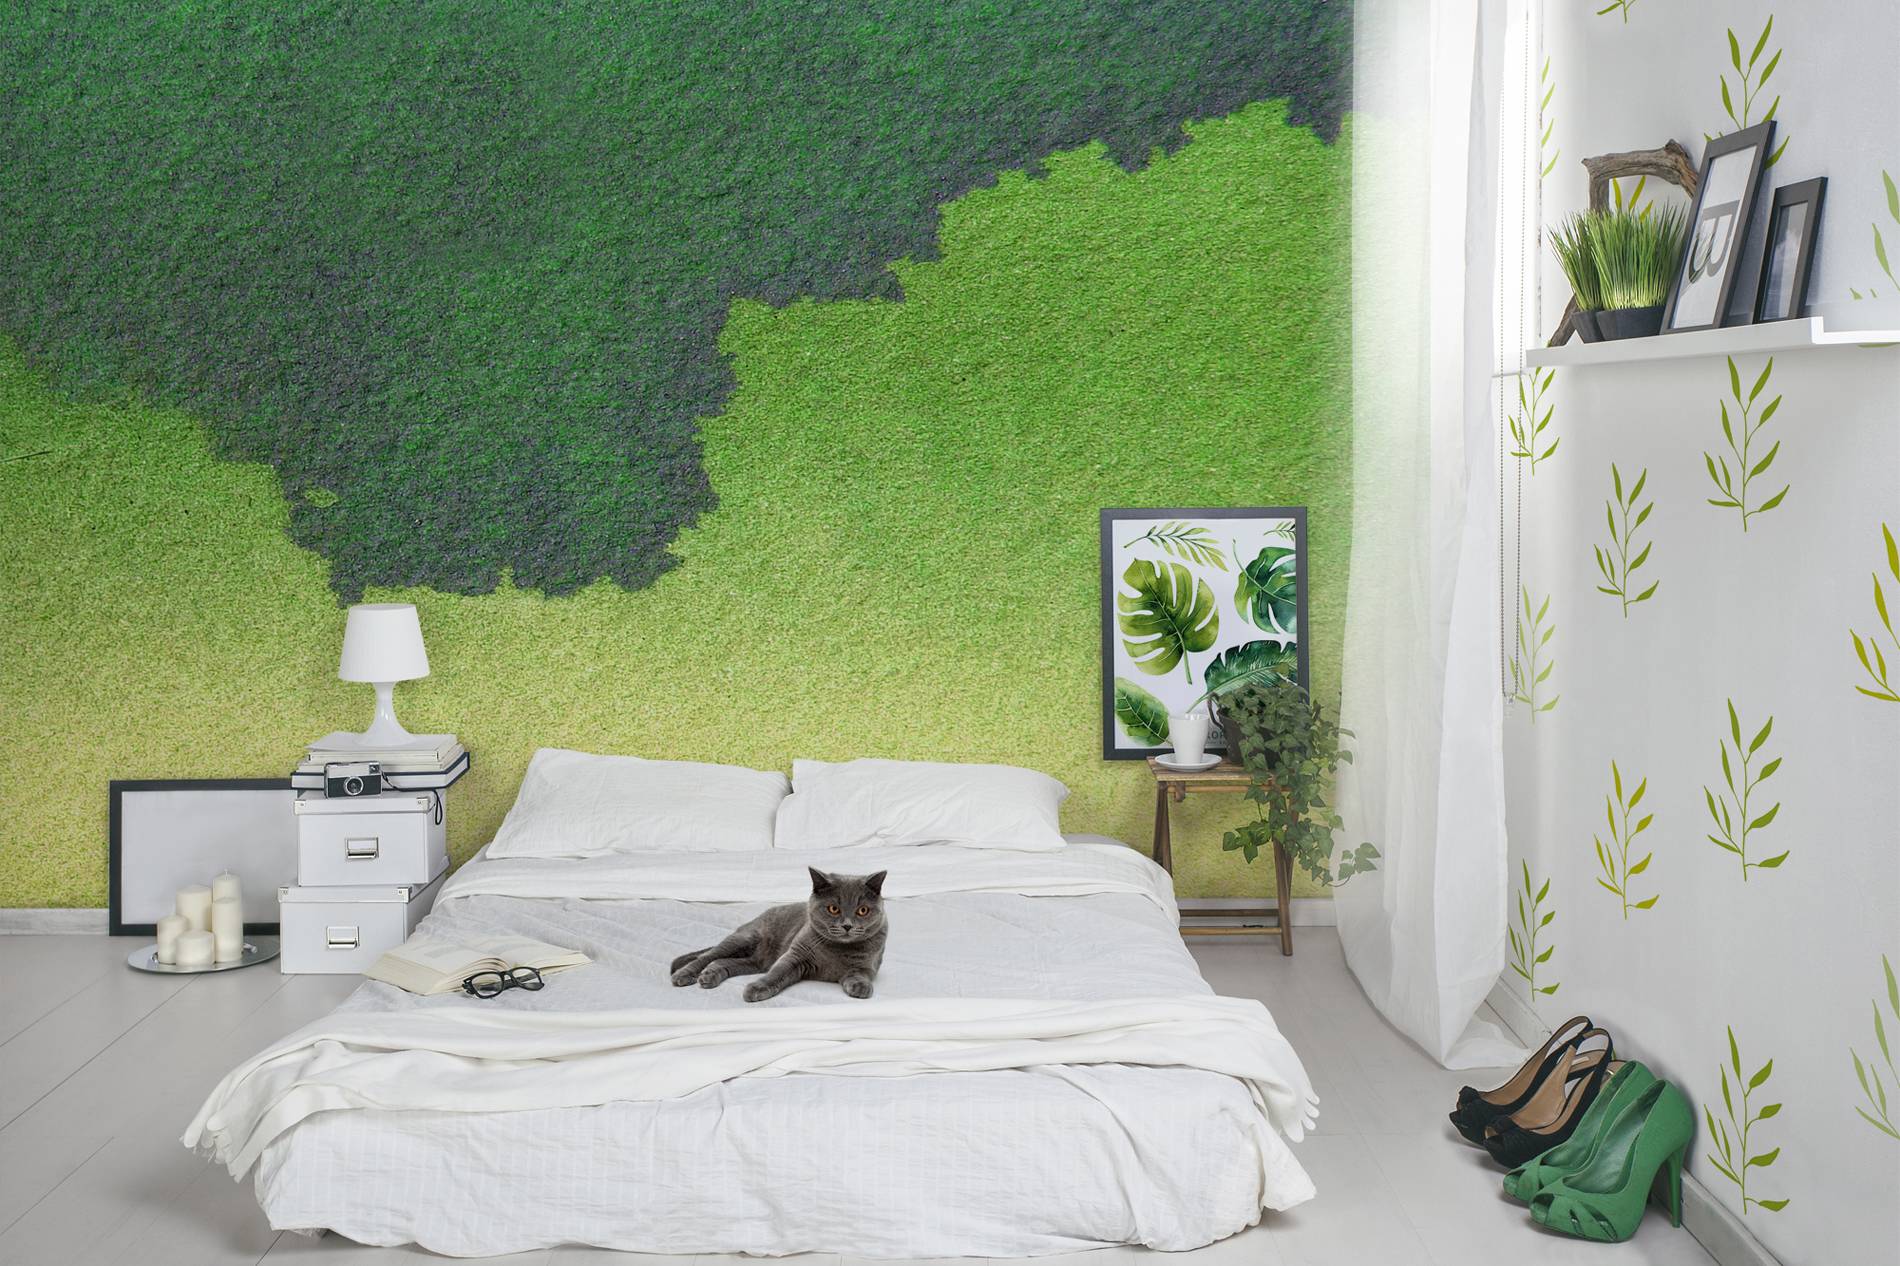 Green game • Contemporary - Bedroom - Abstraction - Wall Murals - Posters